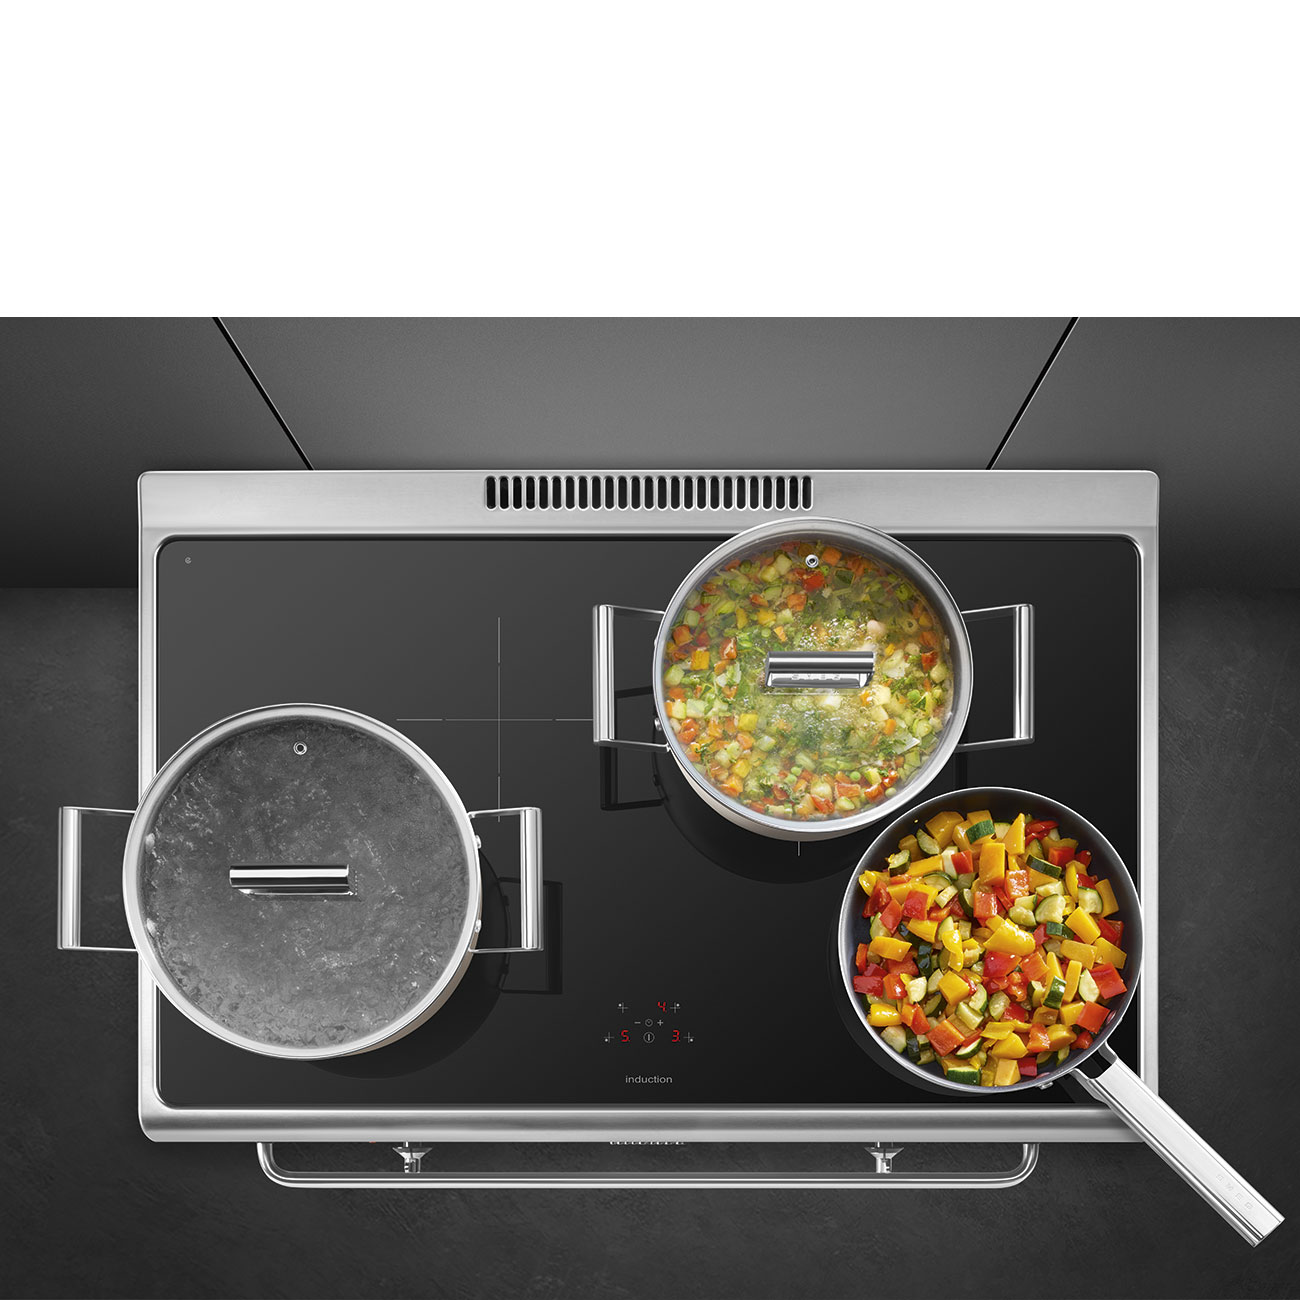 Smeg Stainless steel Cooker with Induction Hob_8